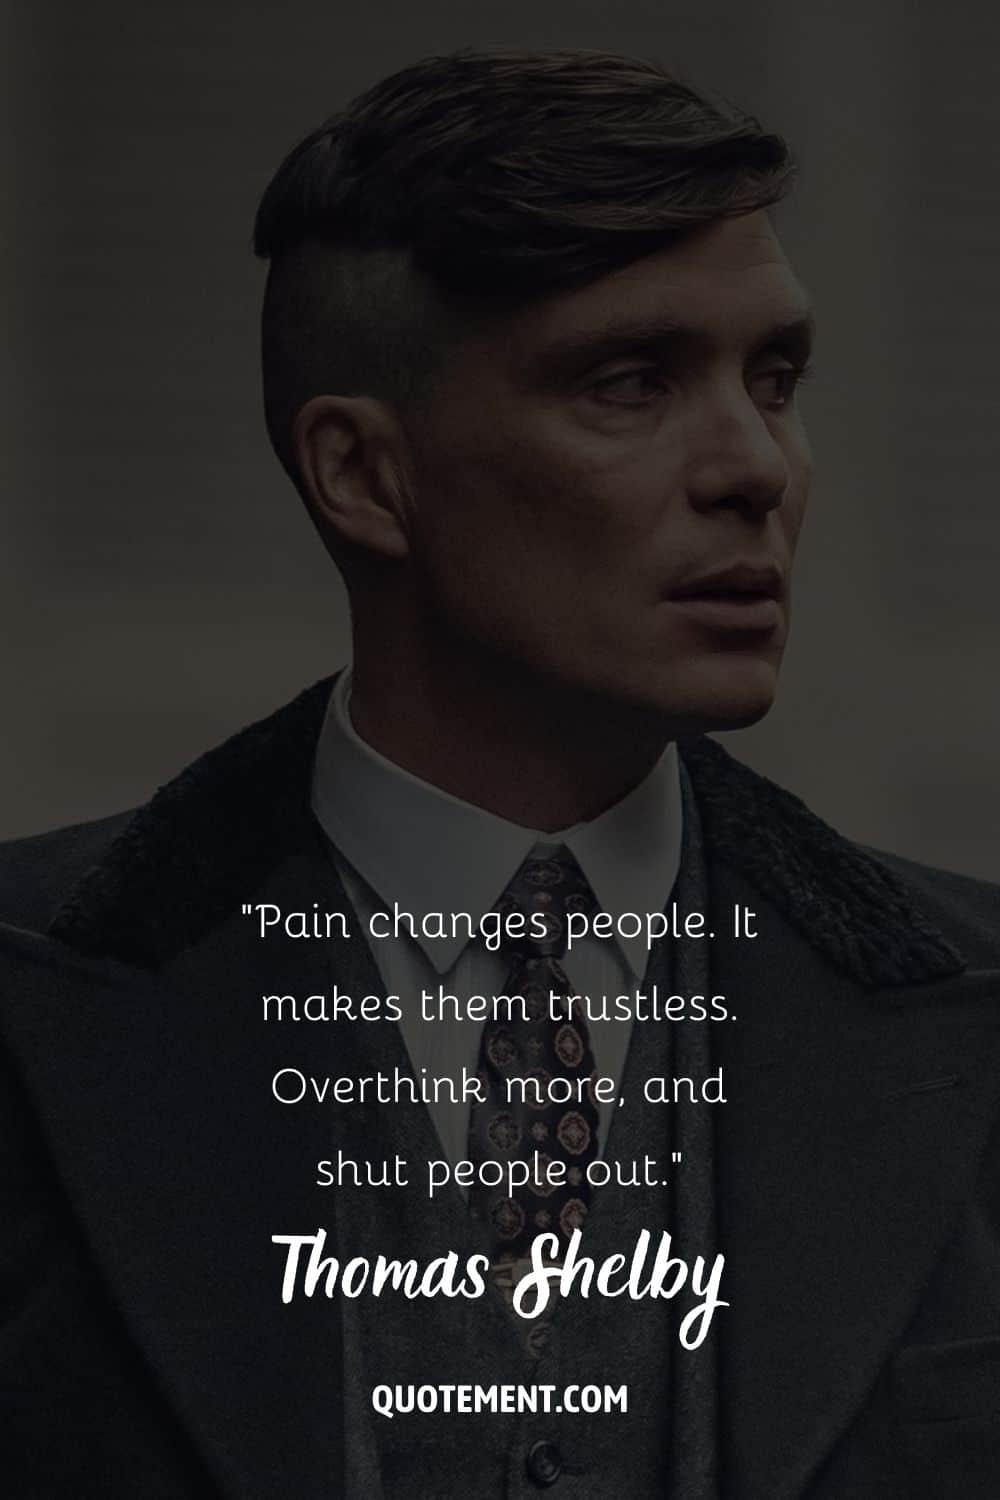 Tommy and Grace Shelby - I learned long ago to hate my enemies